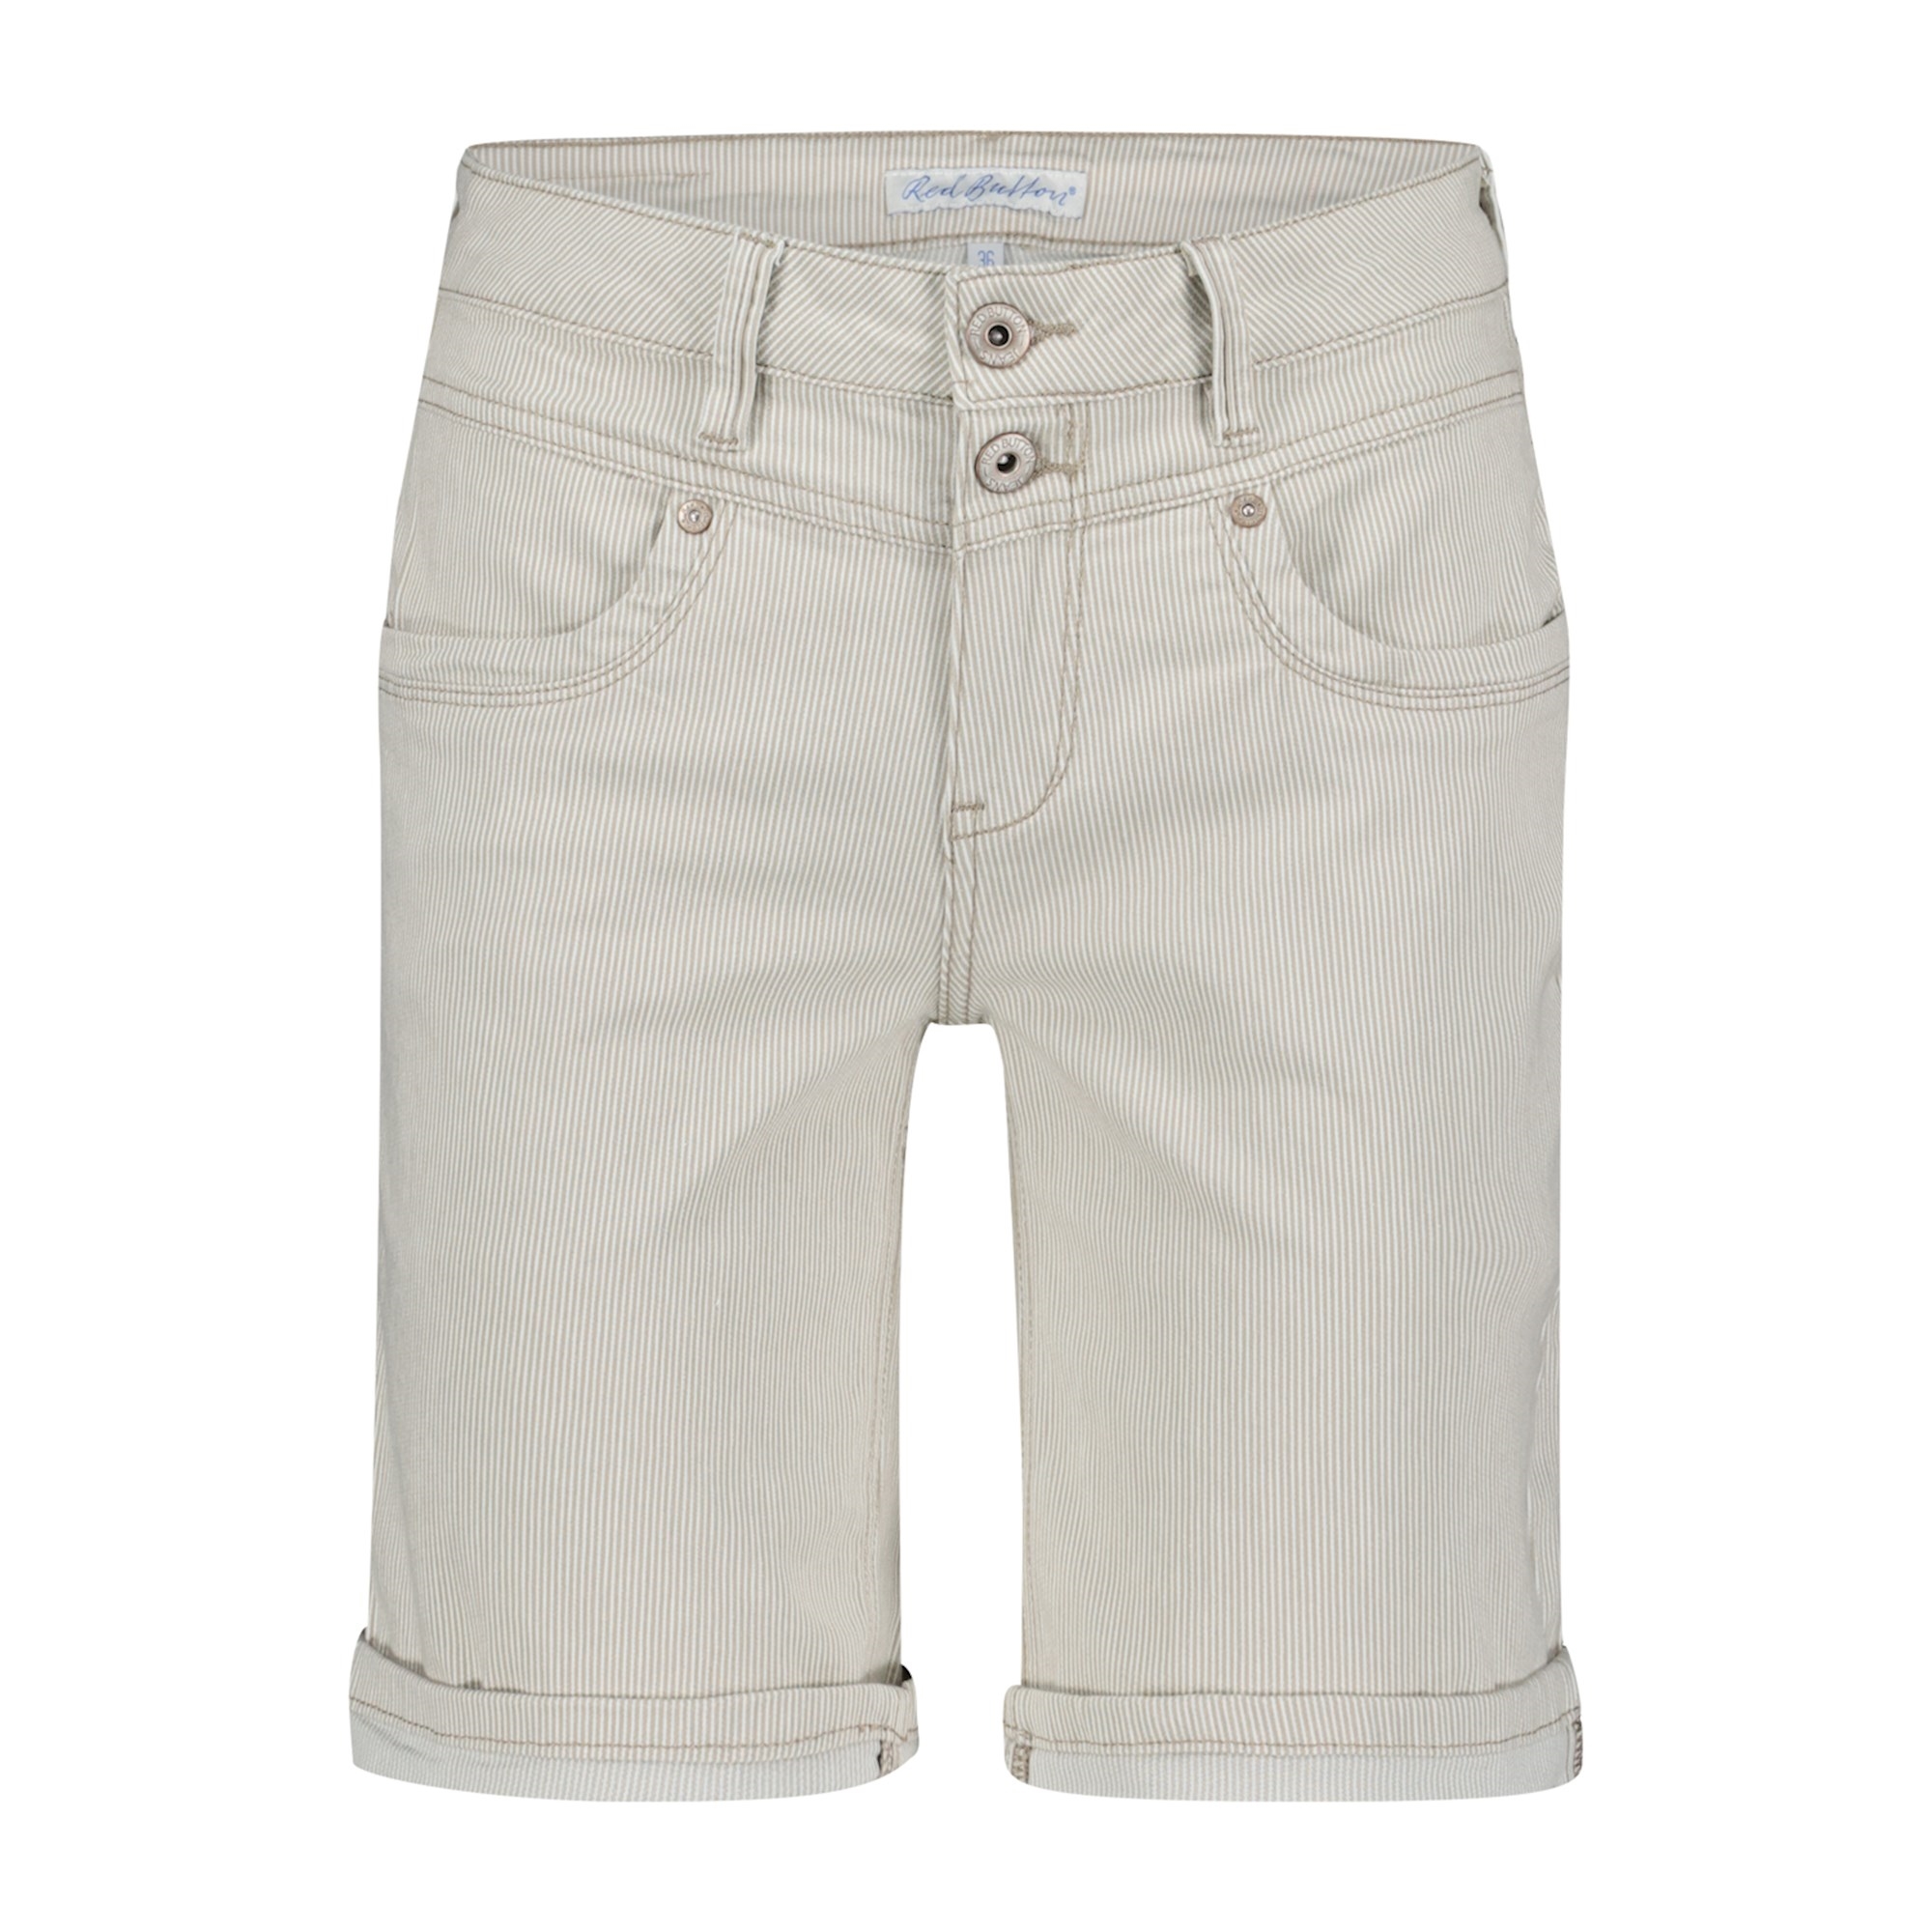 Trofast Outlaw Ud Red Button Sienna shorts, strib, sand hvid